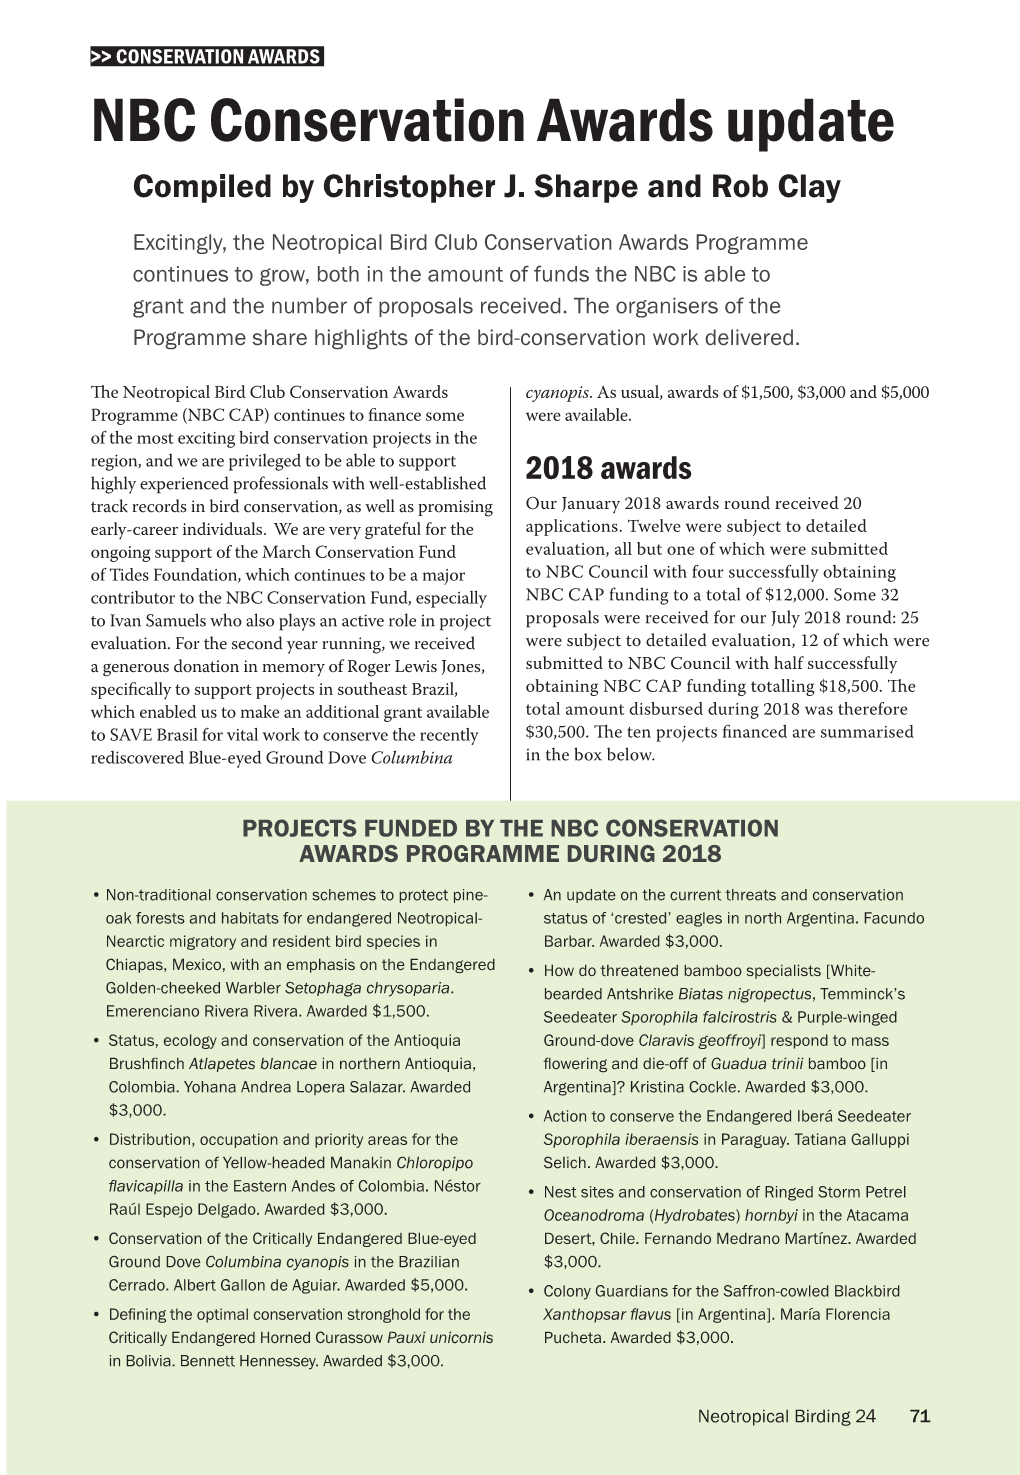 NBC Conservation Awards Update Compiled by Christopher J